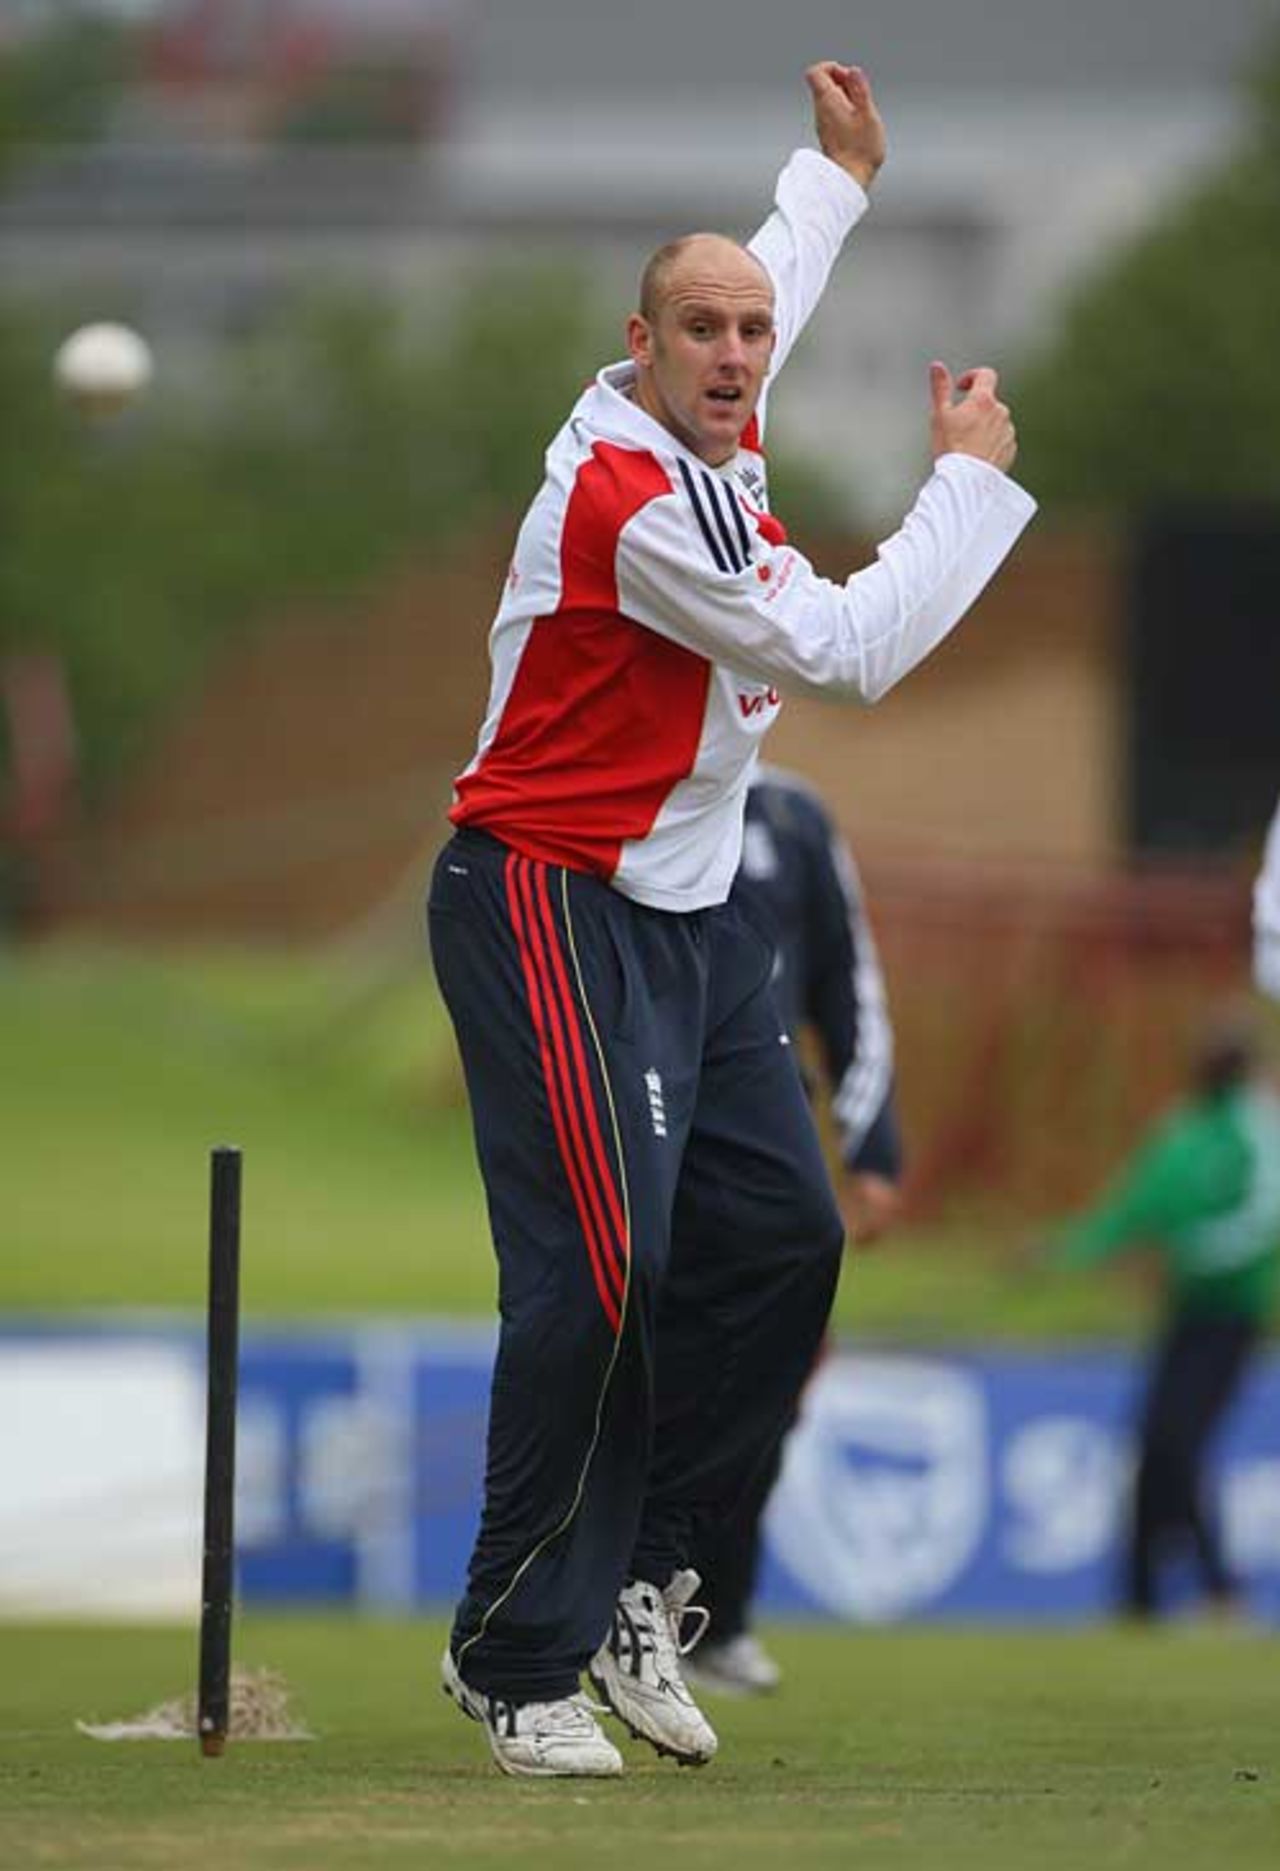 James Tredwell could be in line for his international debut, Centurion Park, November 21, 2009